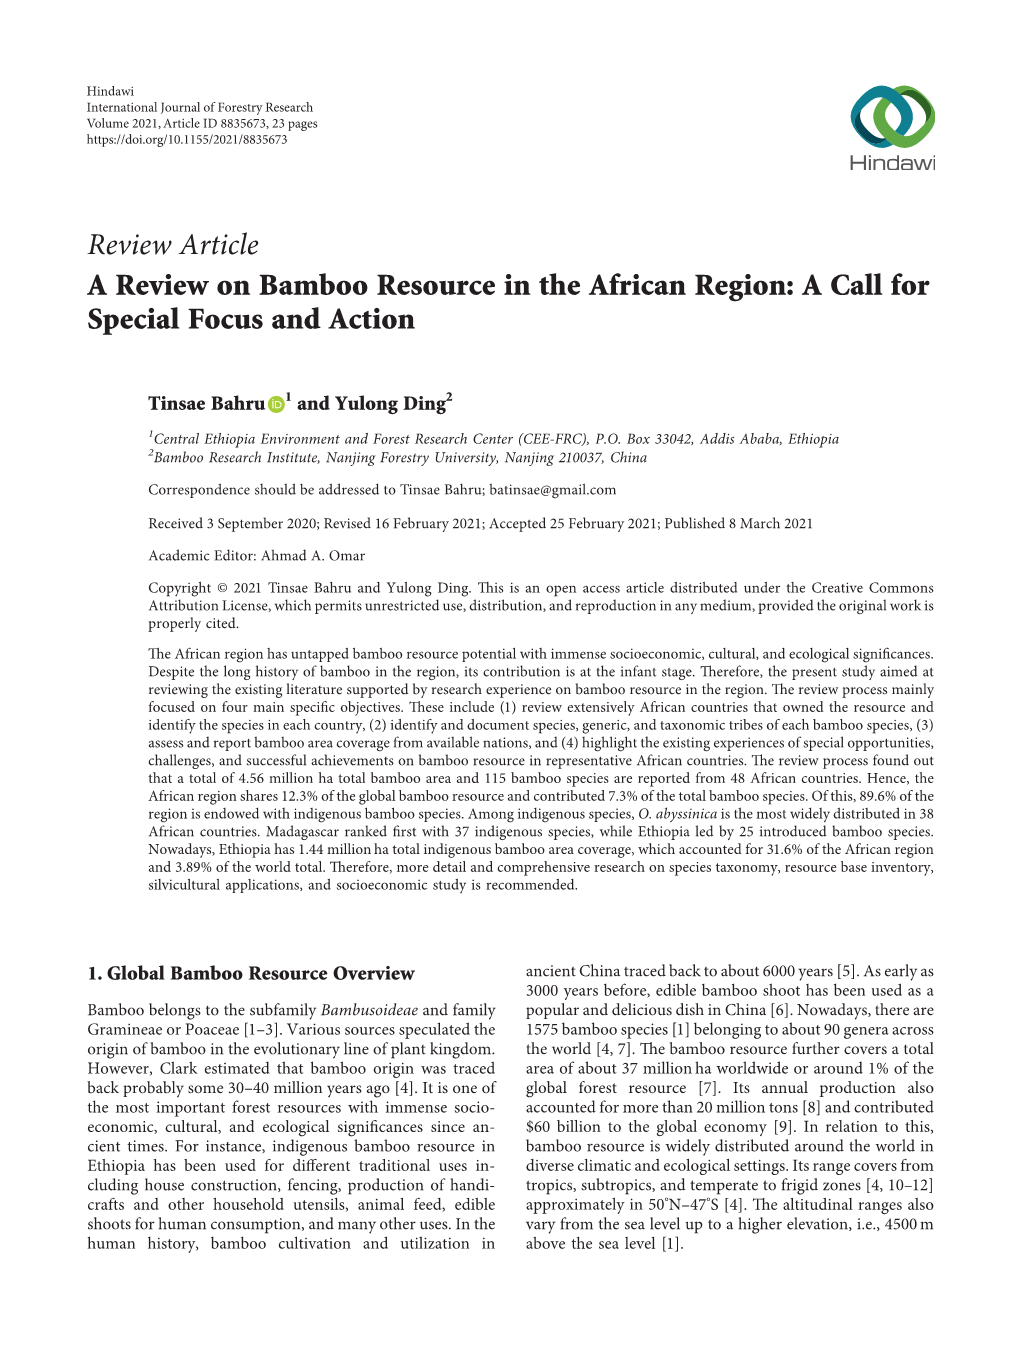 A Review on Bamboo Resource in the African Region: a Call for Special Focus and Action